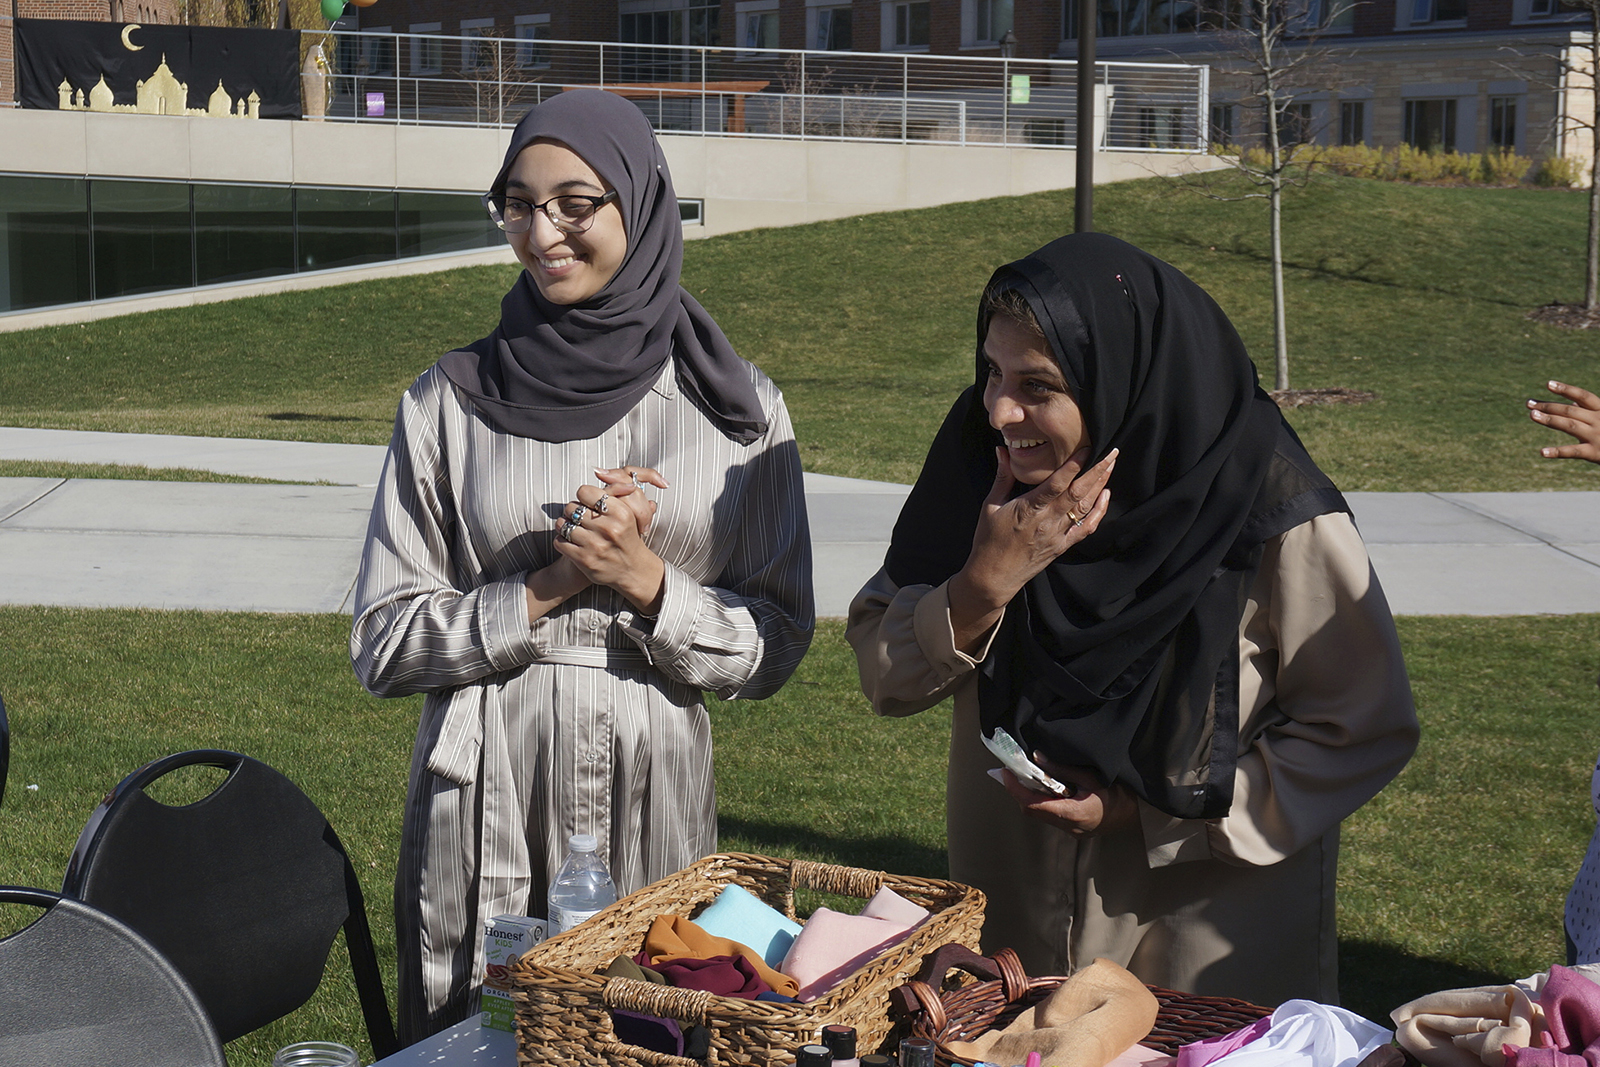 University of St. Thomas graduating senior Salma Nadir, left, and Muslim chaplain Sadaf Shier talk with students attending the school's celebration for the end of the Muslim holy month of Ramadan in St. Paul, Minn., on Saturday, May 7, 2022. Growing numbers of college students across the US are struggling with anxiety and stress, and campus ministry offices are broadening their mission to address the crisis. (AP Photo/Giovanna Dell'Orto)